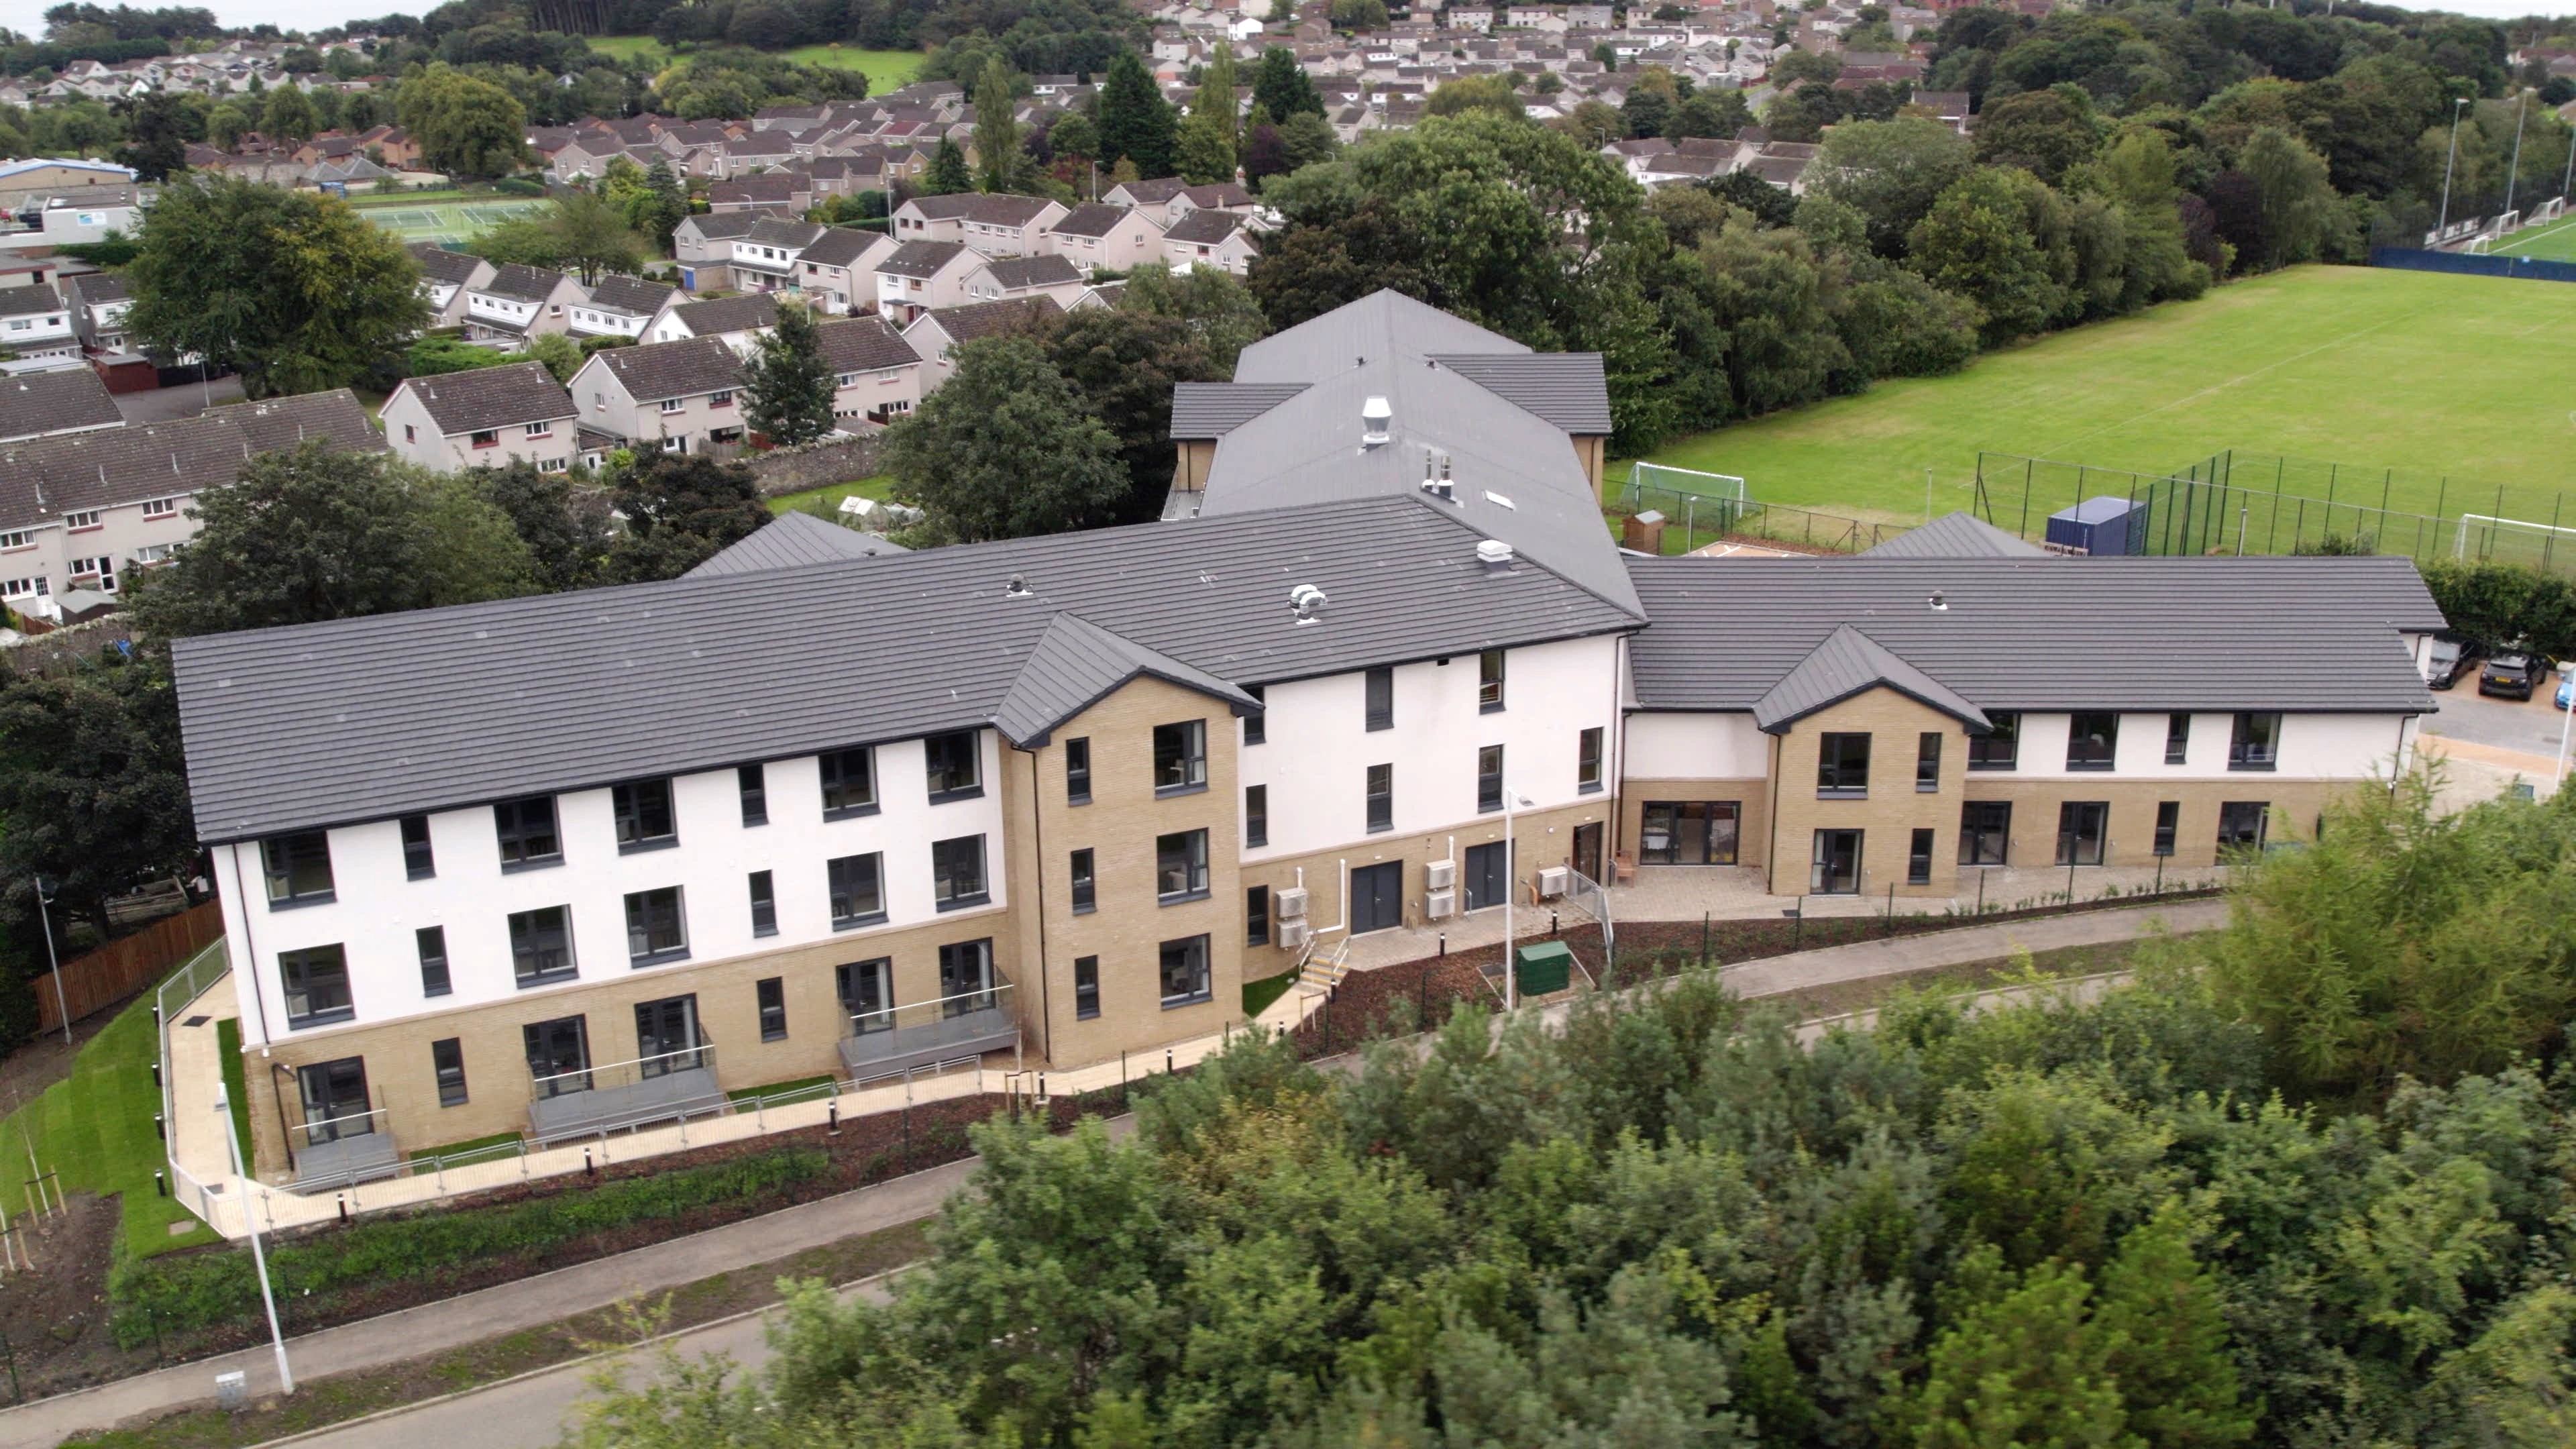 In Pictures: First look at new care home in Dalgety Bay